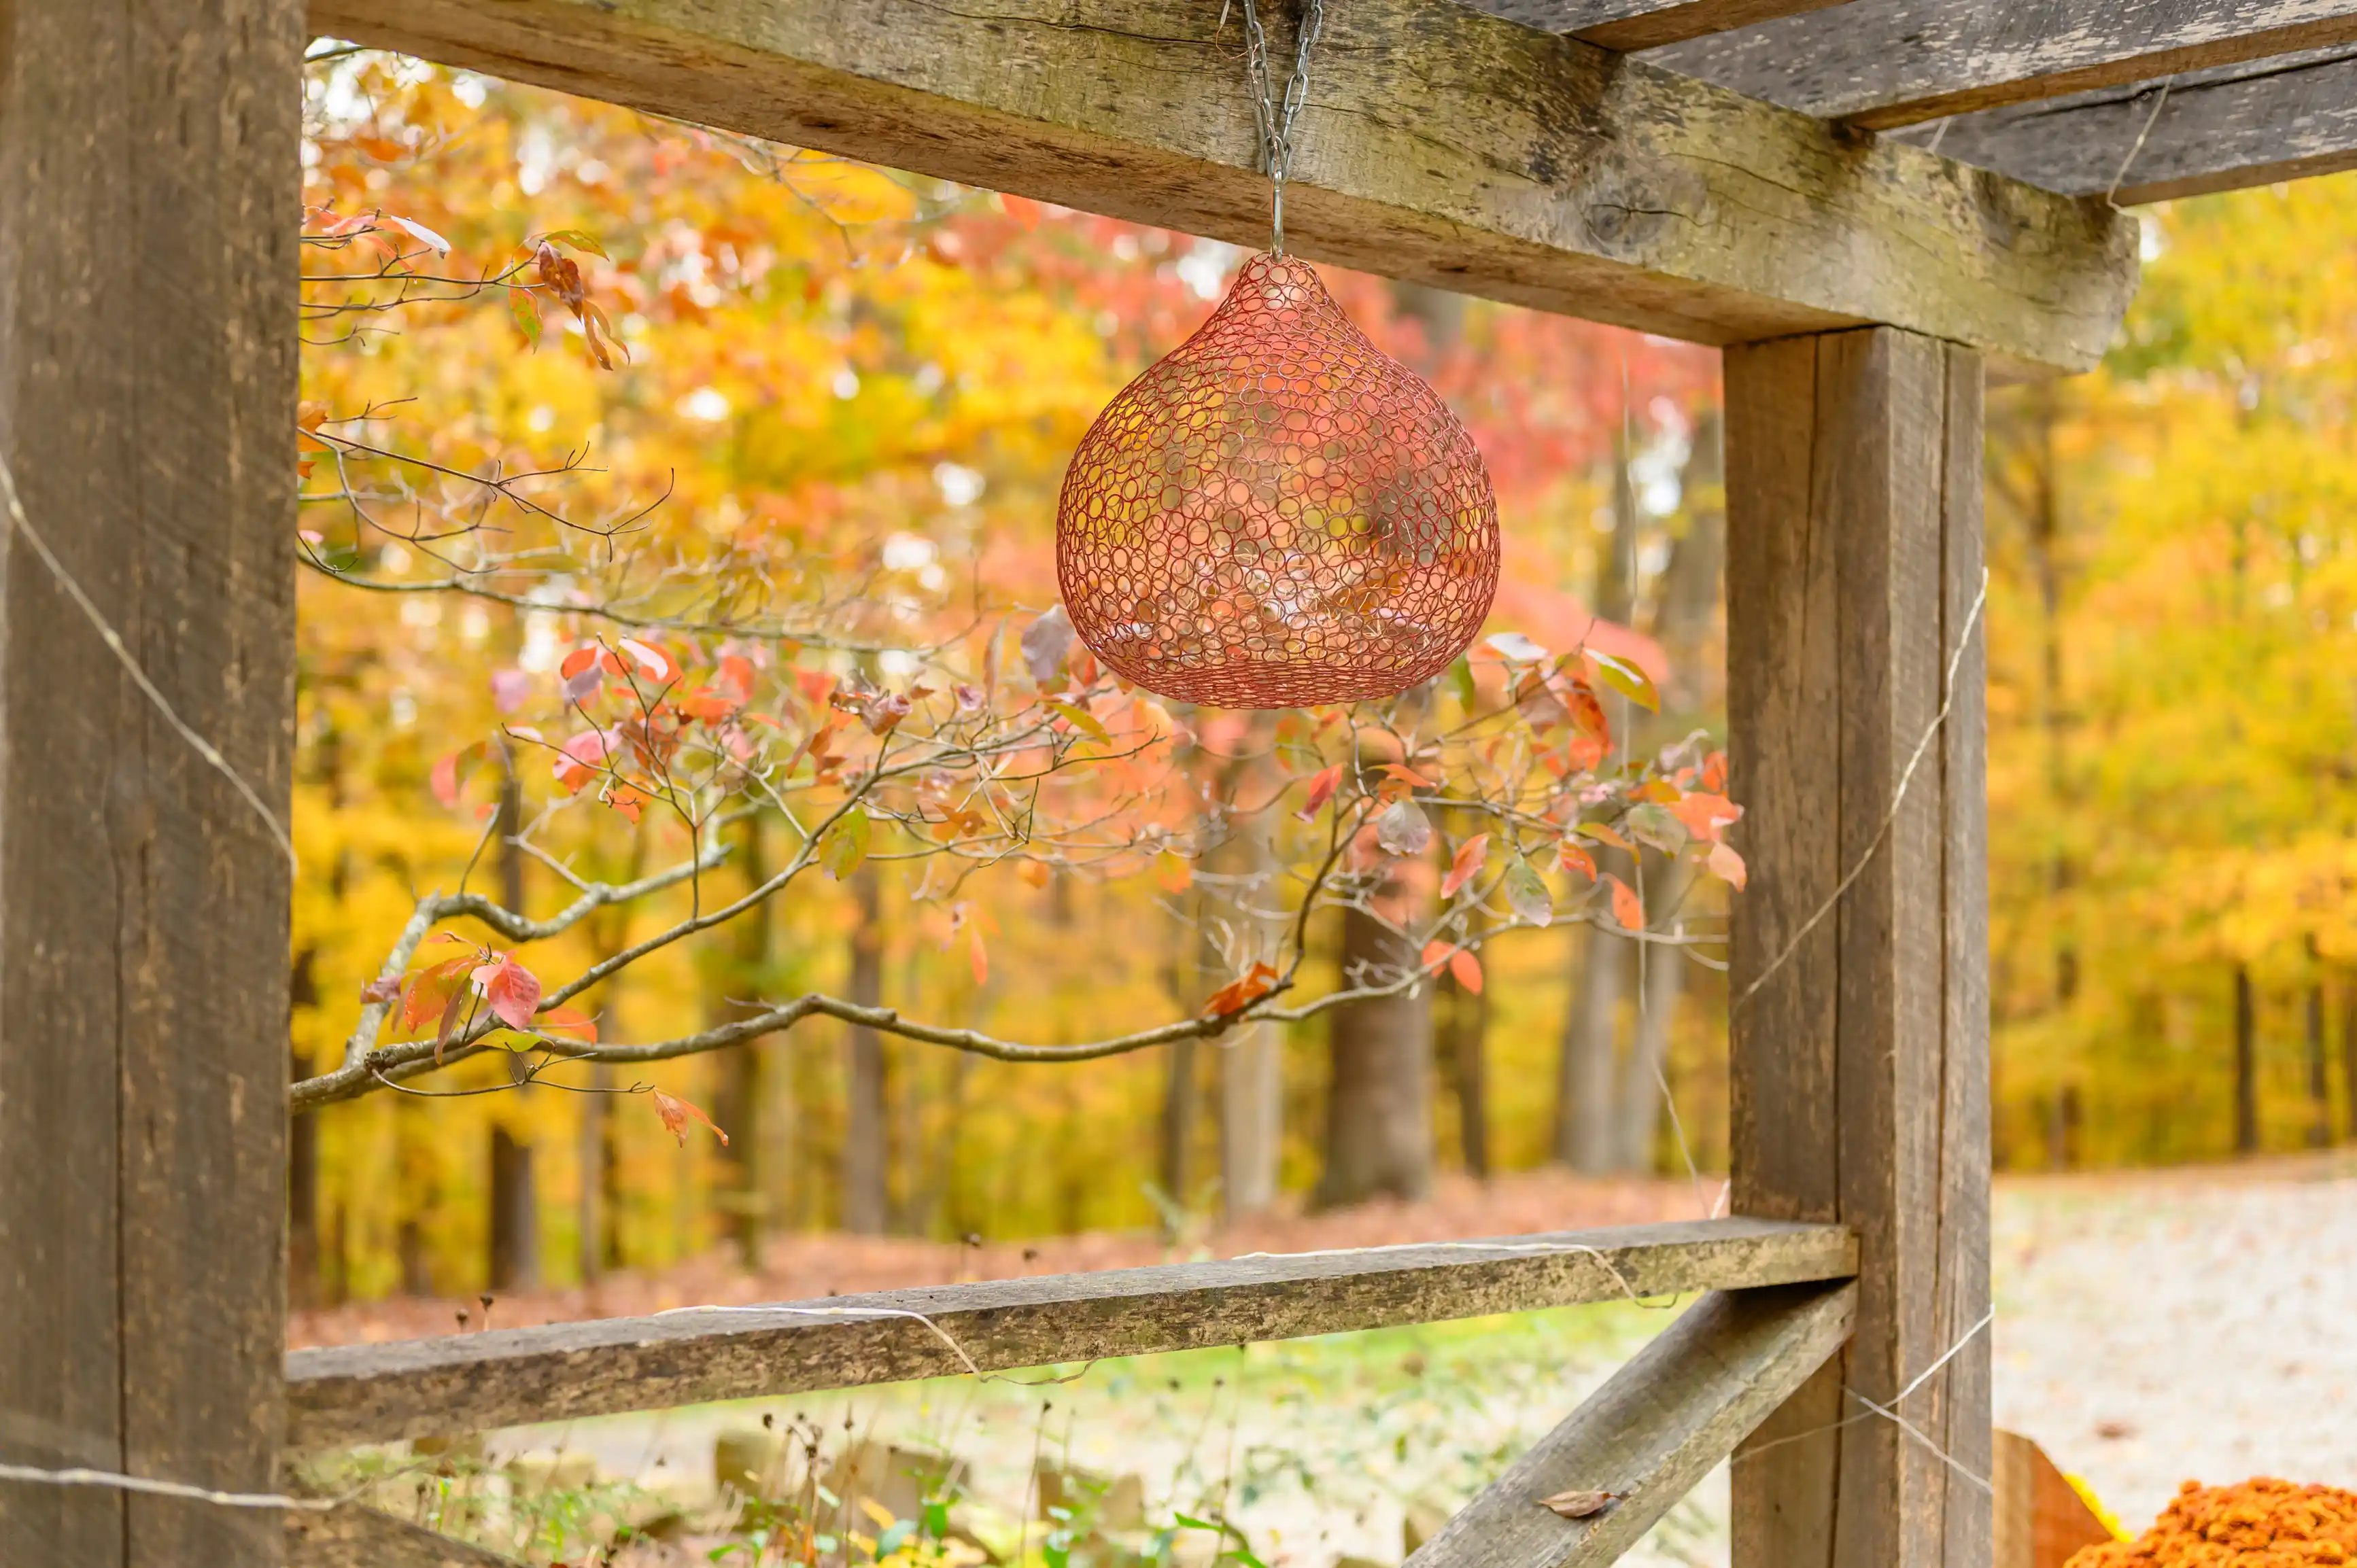 Alt: A red net bird feeder filled with seed hangs from a wooden frame with autumn foliage in the background.